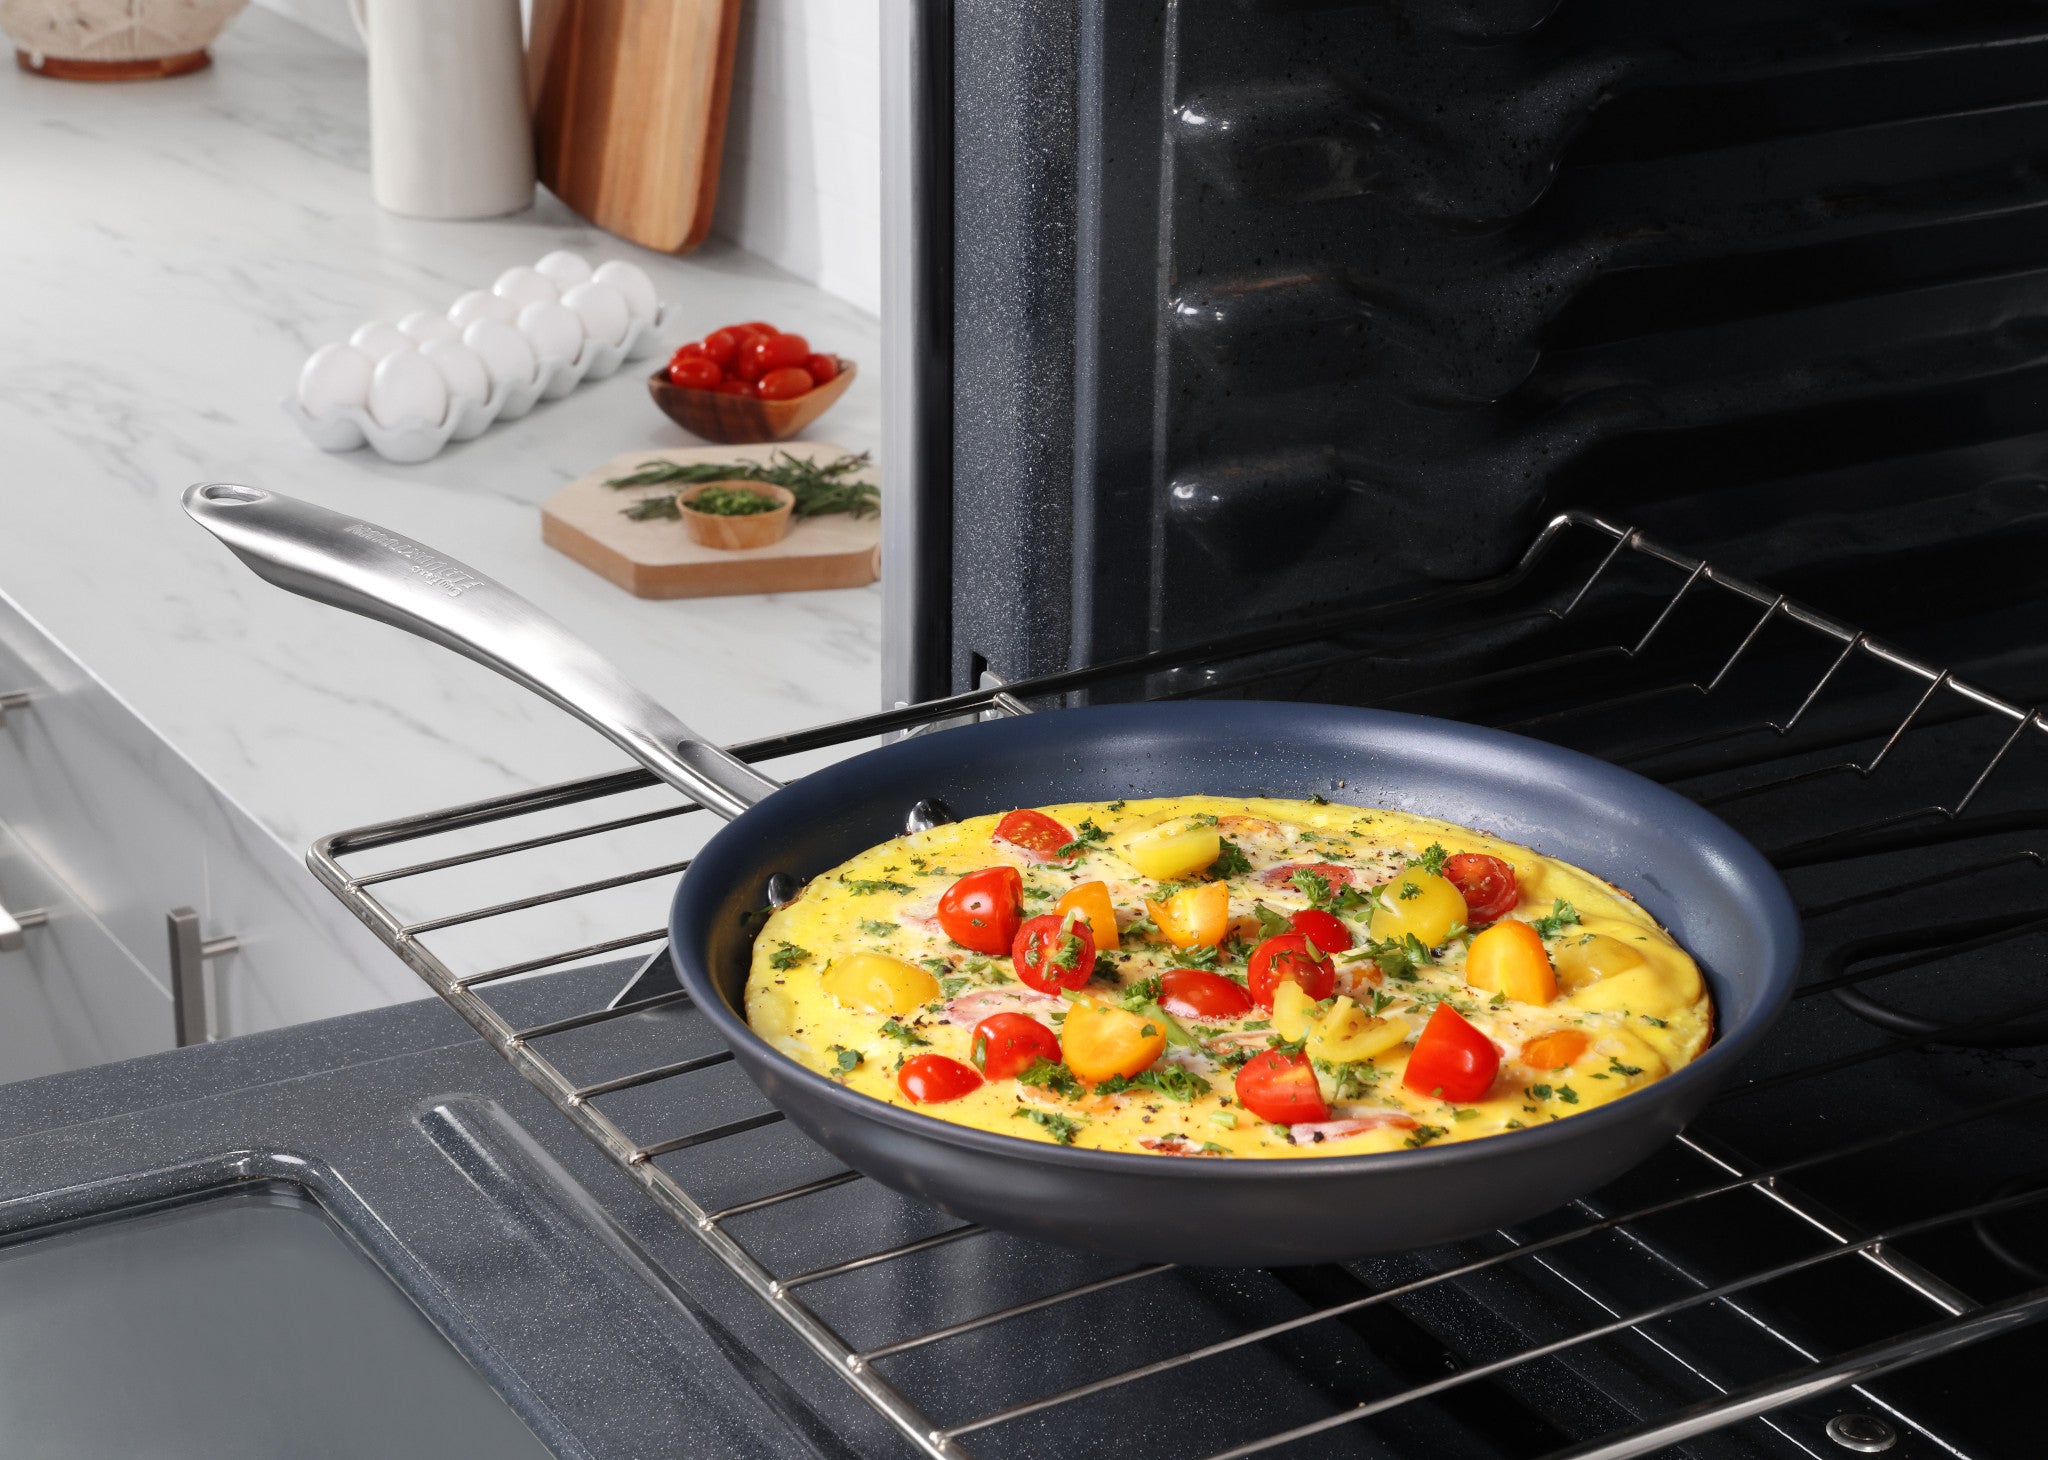 Guy Fieri's Flavortown Laser Titanium 12in Frying Pan with Frittata